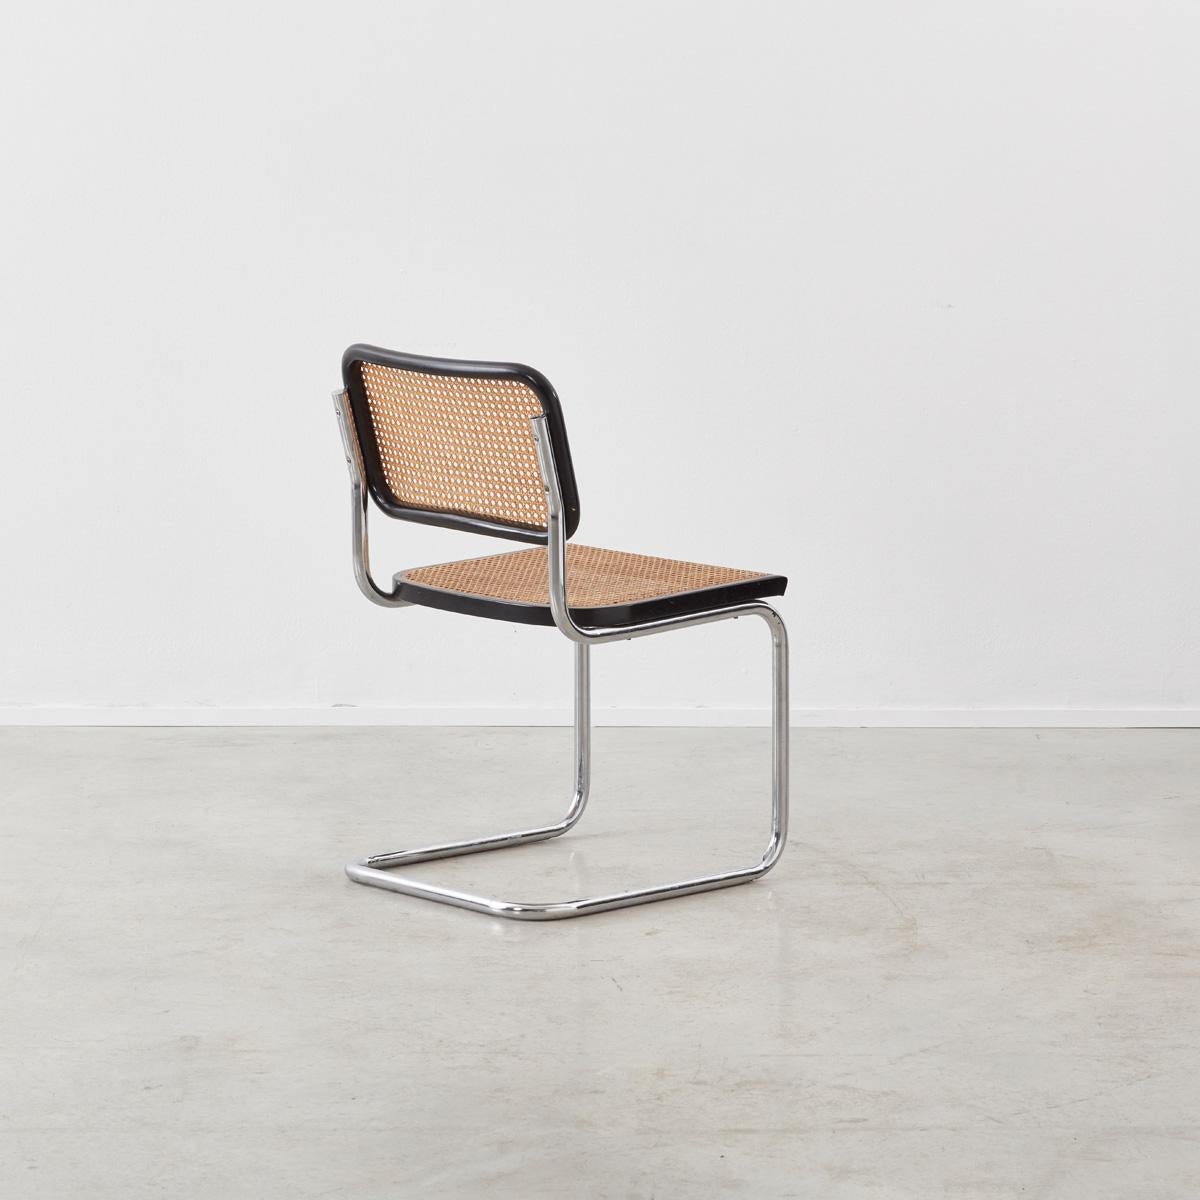 Late 20th Century Marcel Breuer Attributed Cesca Chair, Italy, circa 1970s